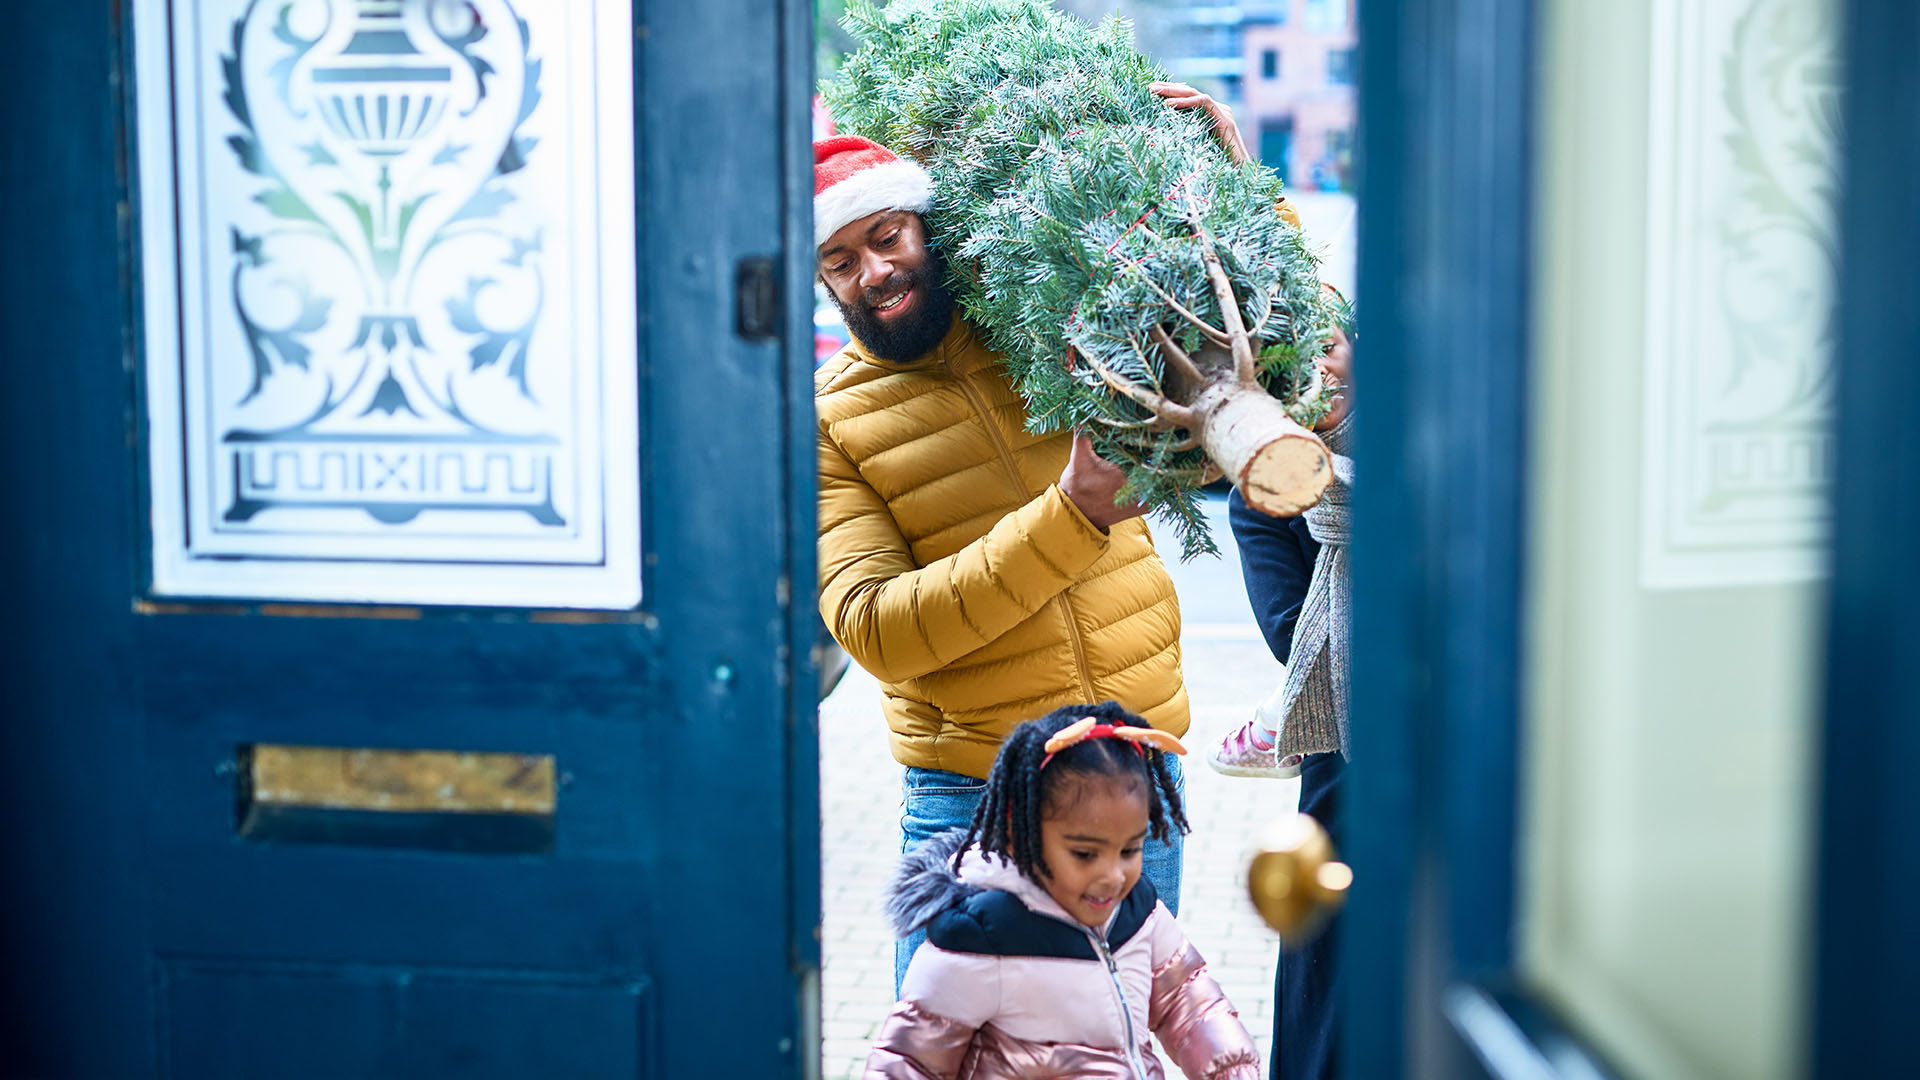 A man walks through a door carrying a Christmas tree with a child walking in the foreground